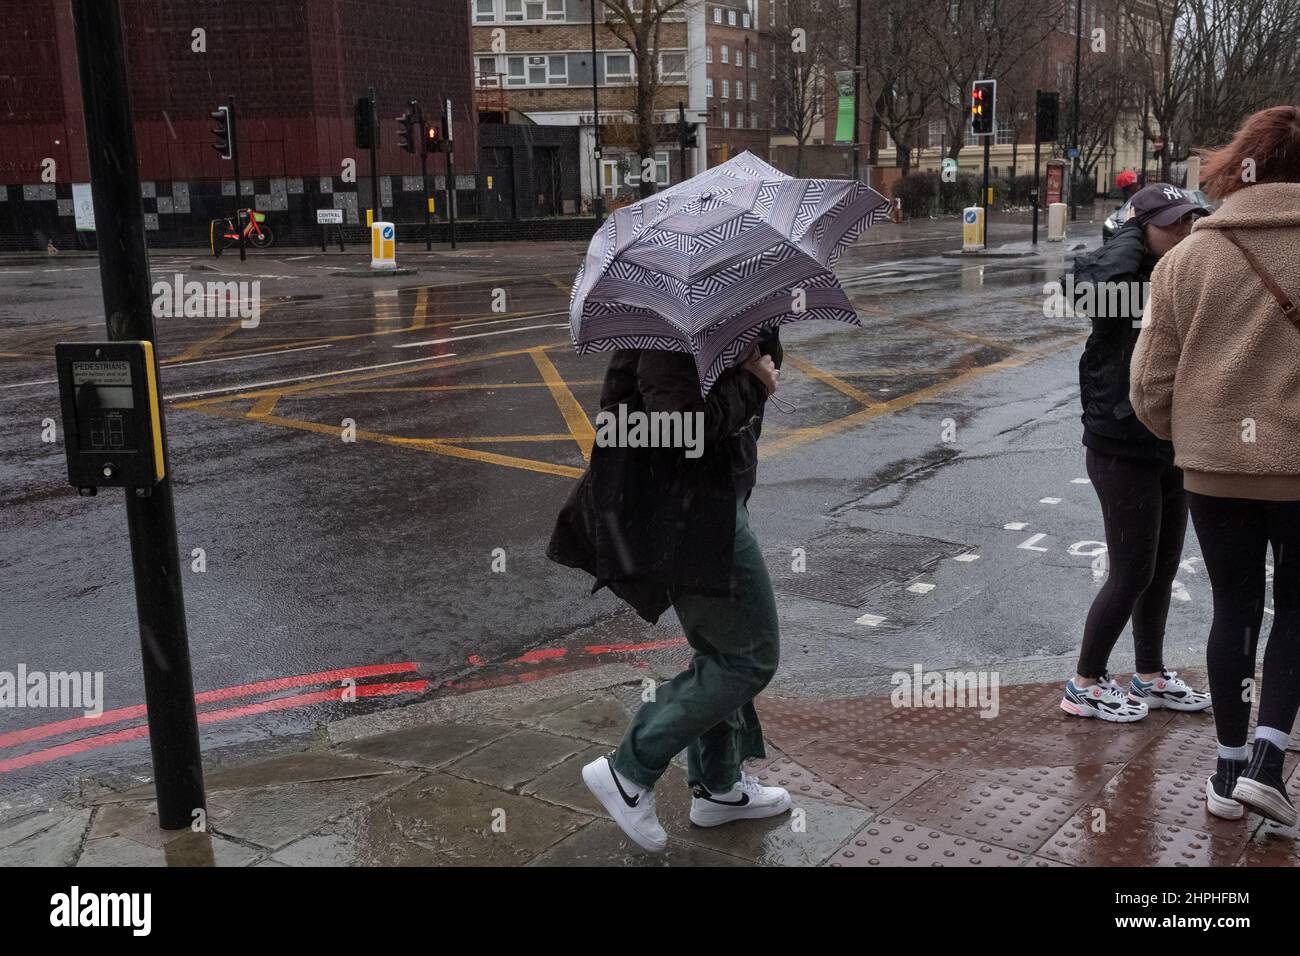 Woman struggling with her umbrella during stormy weather in London UK Stock Photo